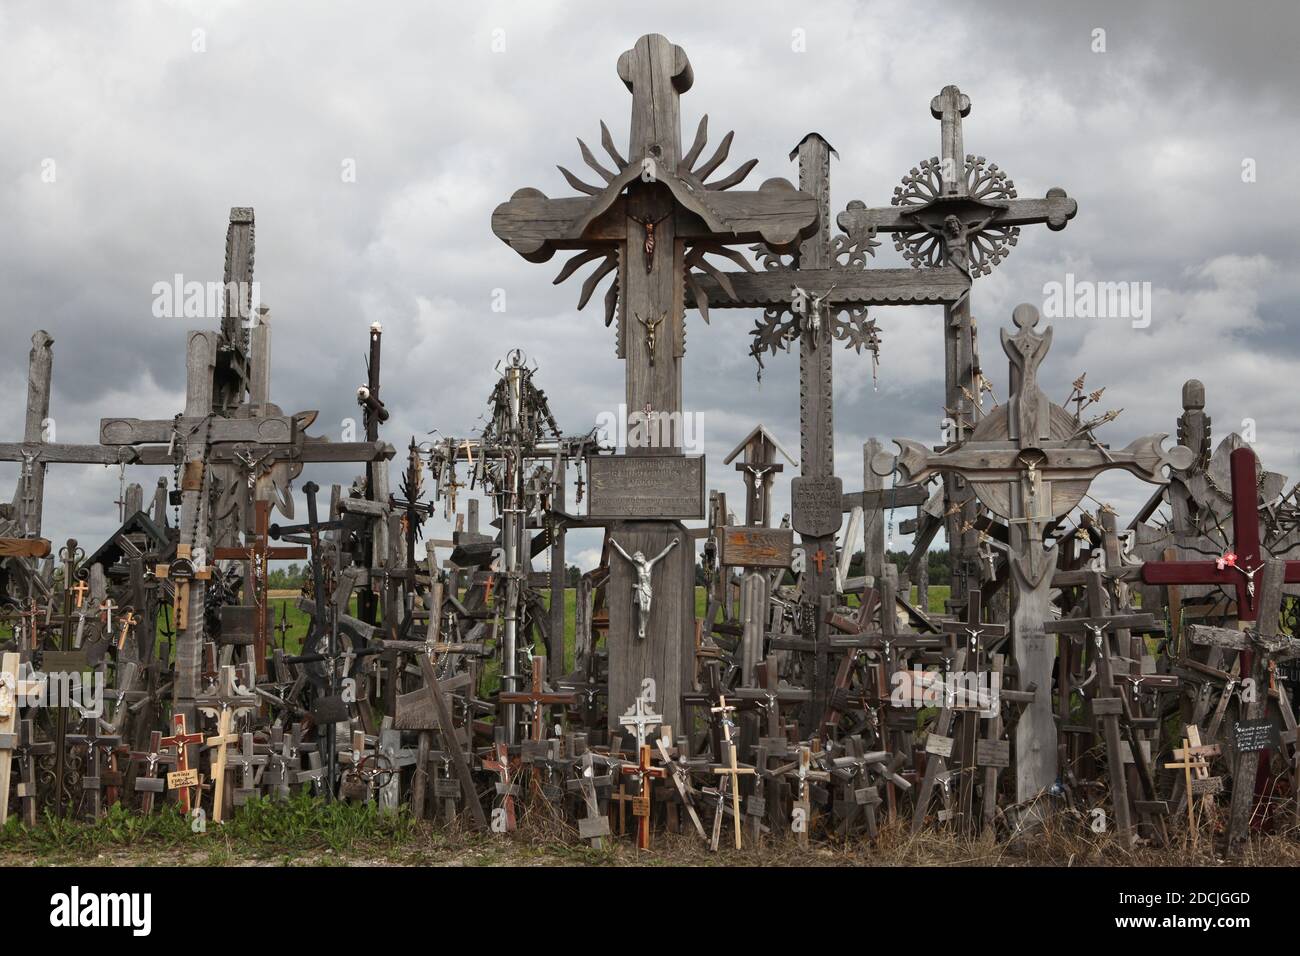 Wooden crosses on the Hill of Crosses near Šiauliai in Lithuania. The most important Lithuanian pilgrimage site is located some 12 km from the town of Šiauliai. Nobody has ever tried to count how many large and small crosses are actually installed on the hill, but it is believed there are at least two hundred thousand crosses here. And every day dozens or even hundreds of new crosses are added by pilgrims from all over the world. Stock Photo